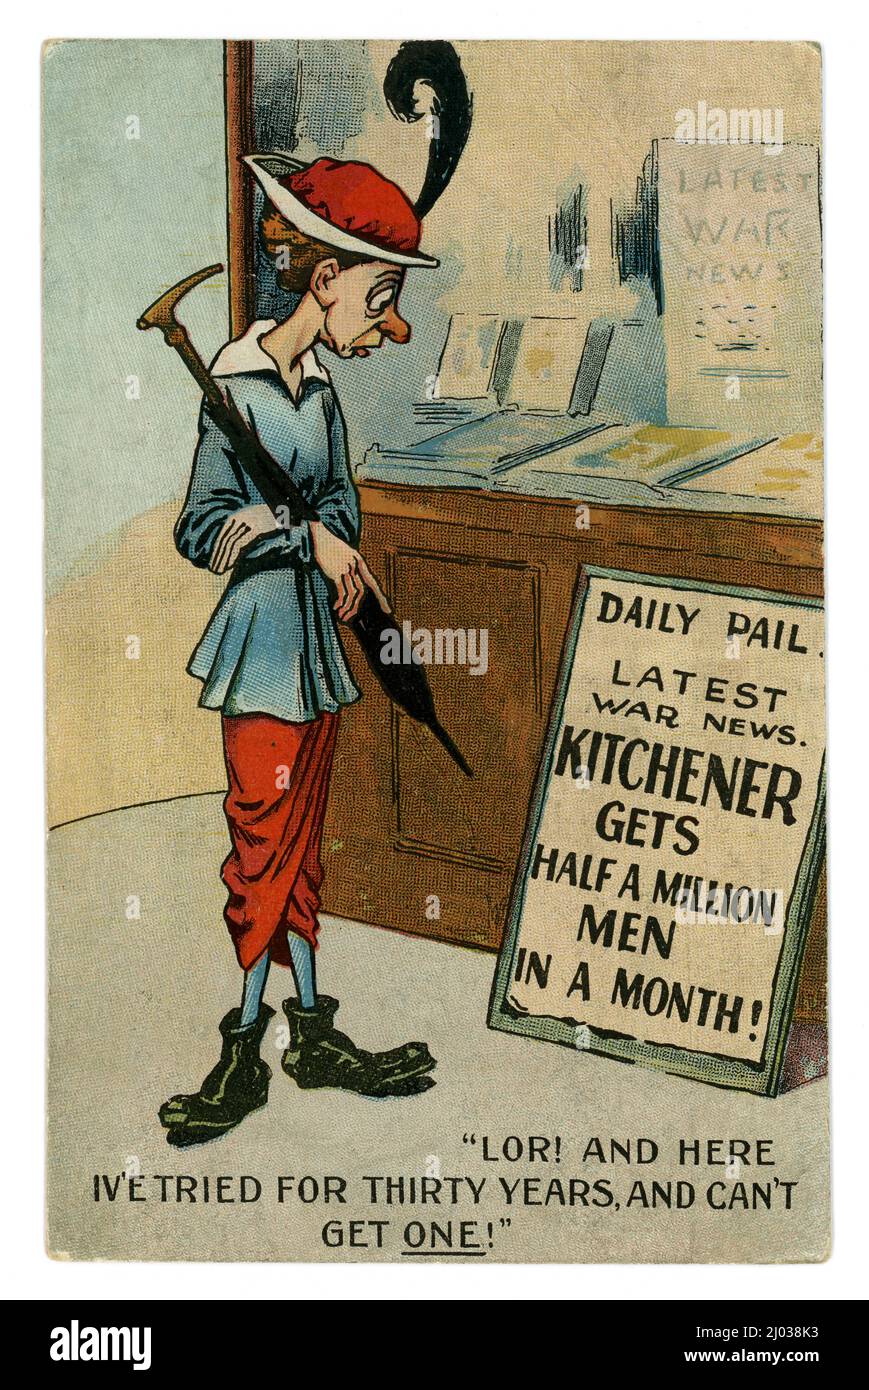 WW1 era comic cartoon postcard of a gaunt woman with a red nose, she is a single woman in her 30's - at this time, unmarried woman were looked at with scorn and frequently portrayed as ugly hags desperate for a husband. This woman is looking at a news poster / news stand at a newsagent that reads 'Kitchener gets half a million men in a month'. The lady says 'Lor! And here I've tried for thirty years, and can't get one!' - Year: circa 1914 Play on the title of the Daily Mail - the poster reads Daily Pail. Published by Brown and Calder, London, U.K. Circa 1914 - 1915. Stock Photo